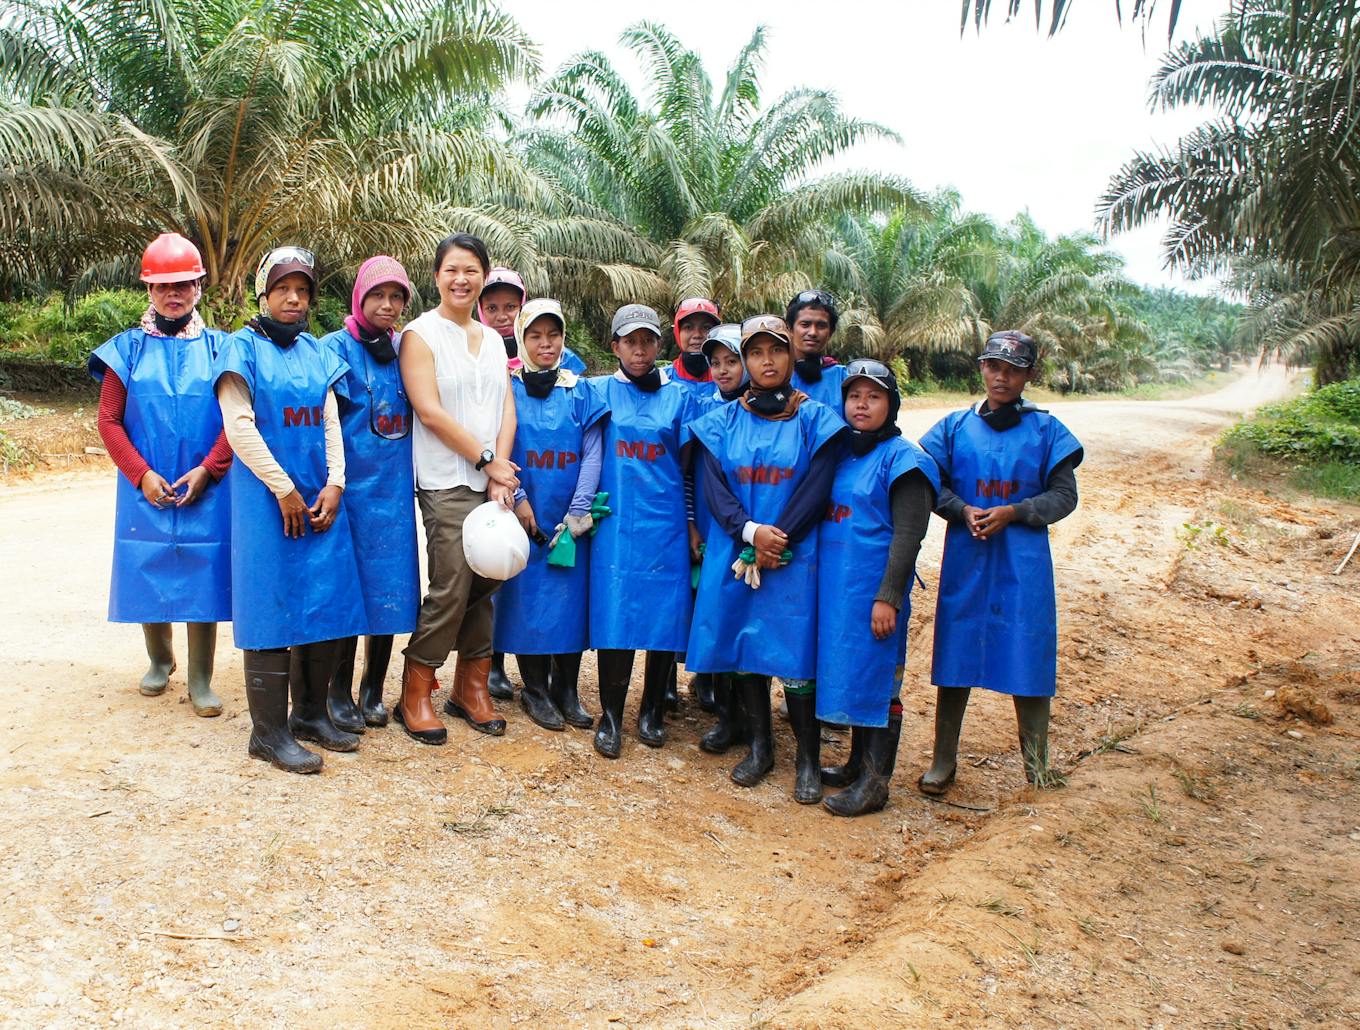 Cherie Tan with palm oil workers in East Kalimantan, Indonesia, in 2013. Image: Cherie Tan